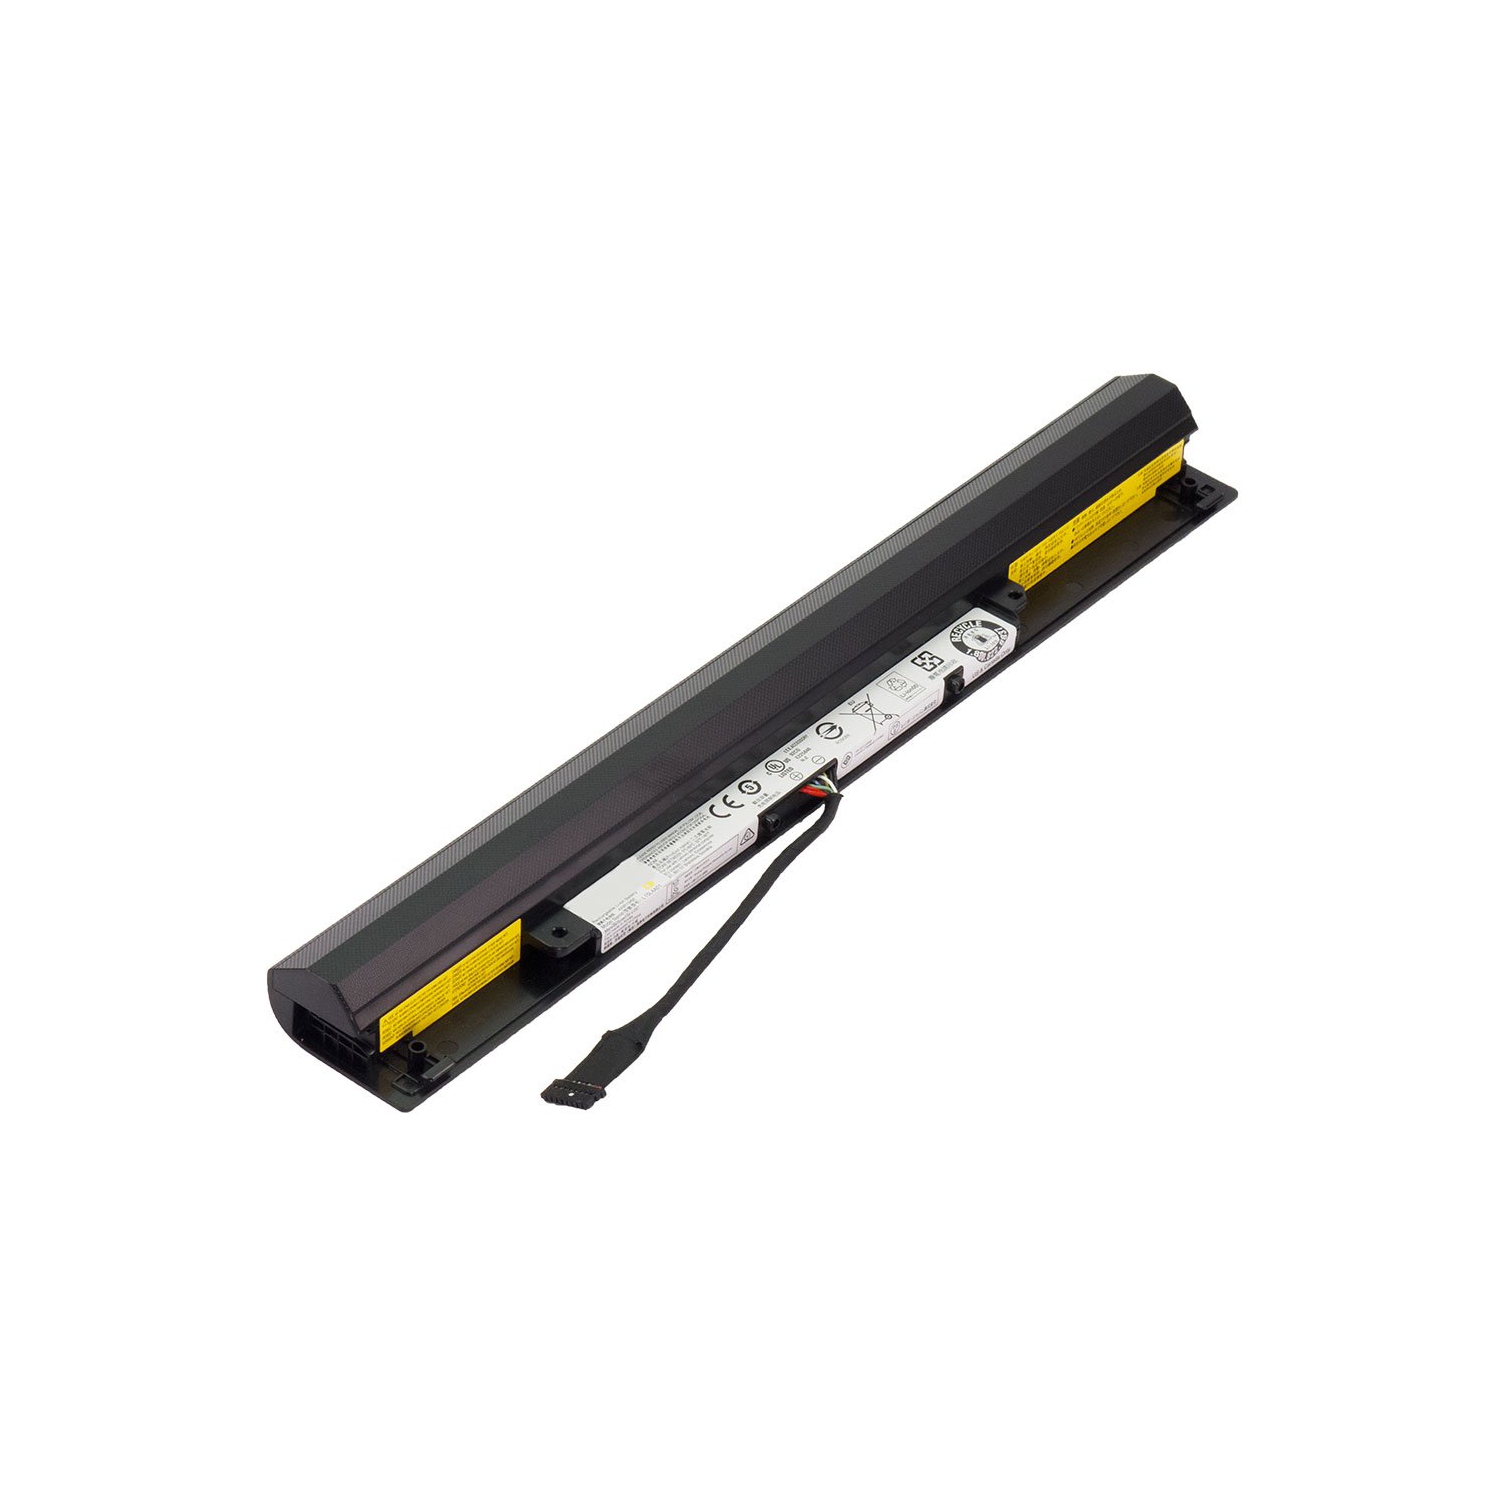 Laptop Battery Replacement for Lenovo IdeaPad 100-15IBD 80MJ00GBGE, 41NR19/65, L15L4A01